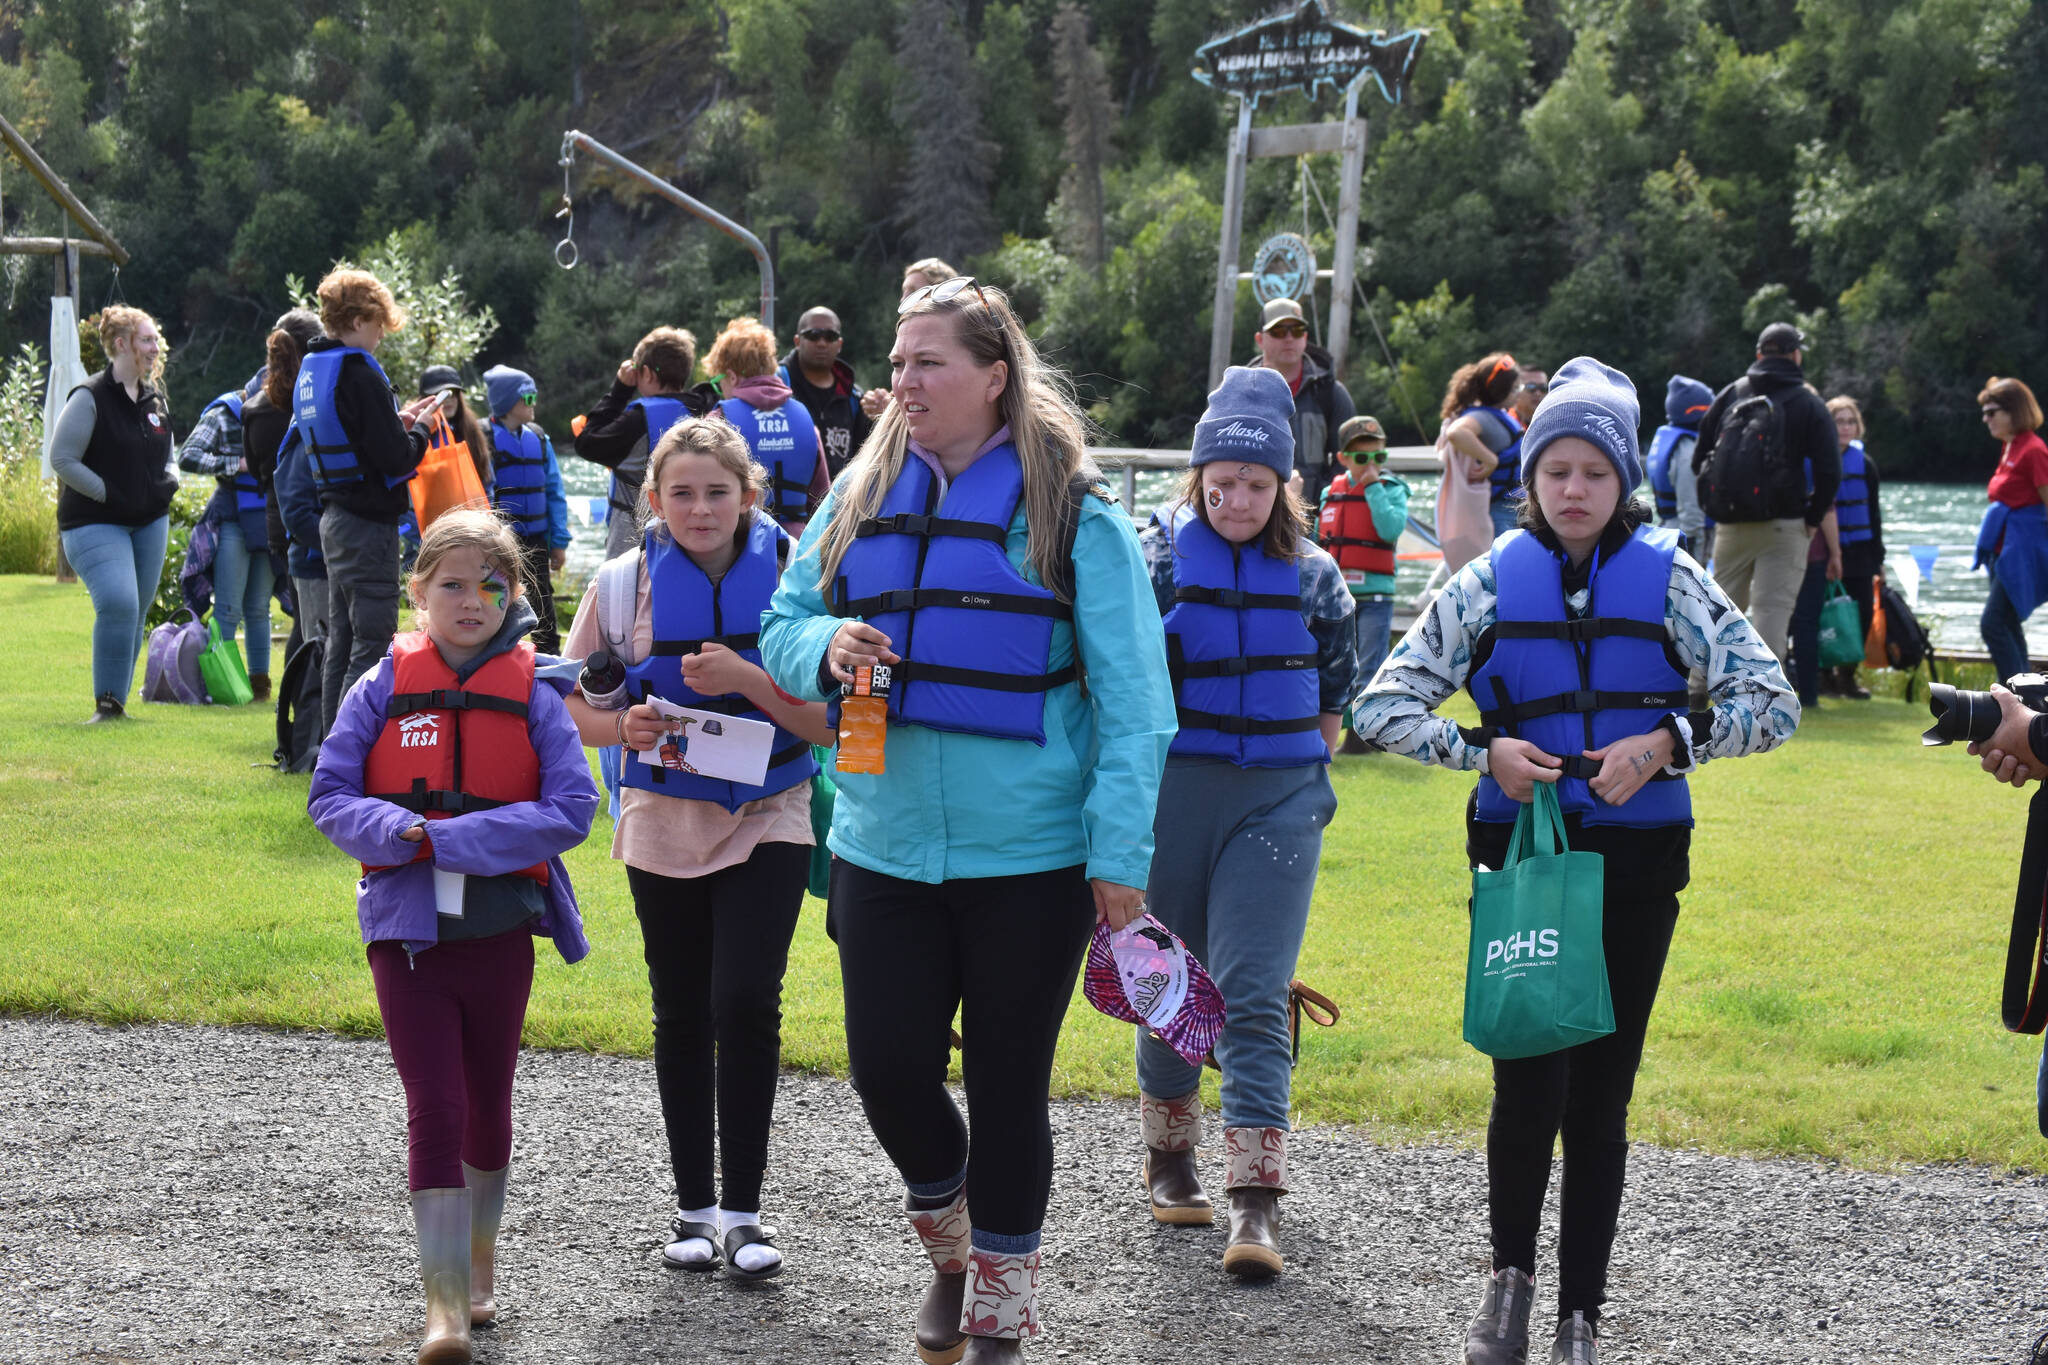 A group of children and a chaperone, fitted with life jackets and waiting to go fishing at the Kenai River Junior Classic in Soldotna, Alaska, on Aug. 10, 2022. (Jake Dye/Peninsula Clarion)